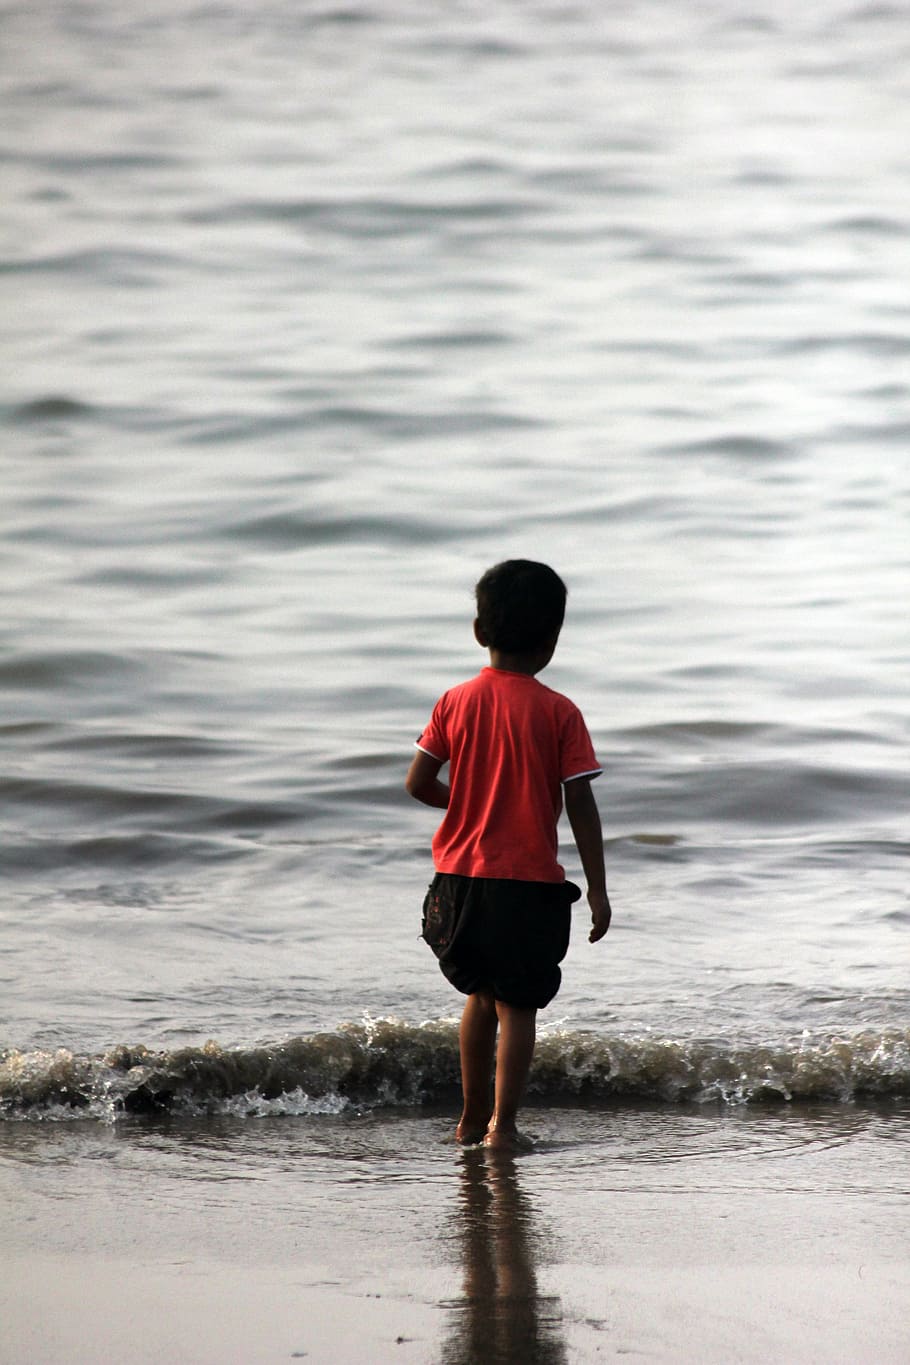 kid, beach, water, child, infant, india, indian, sea, rear View, outdoors